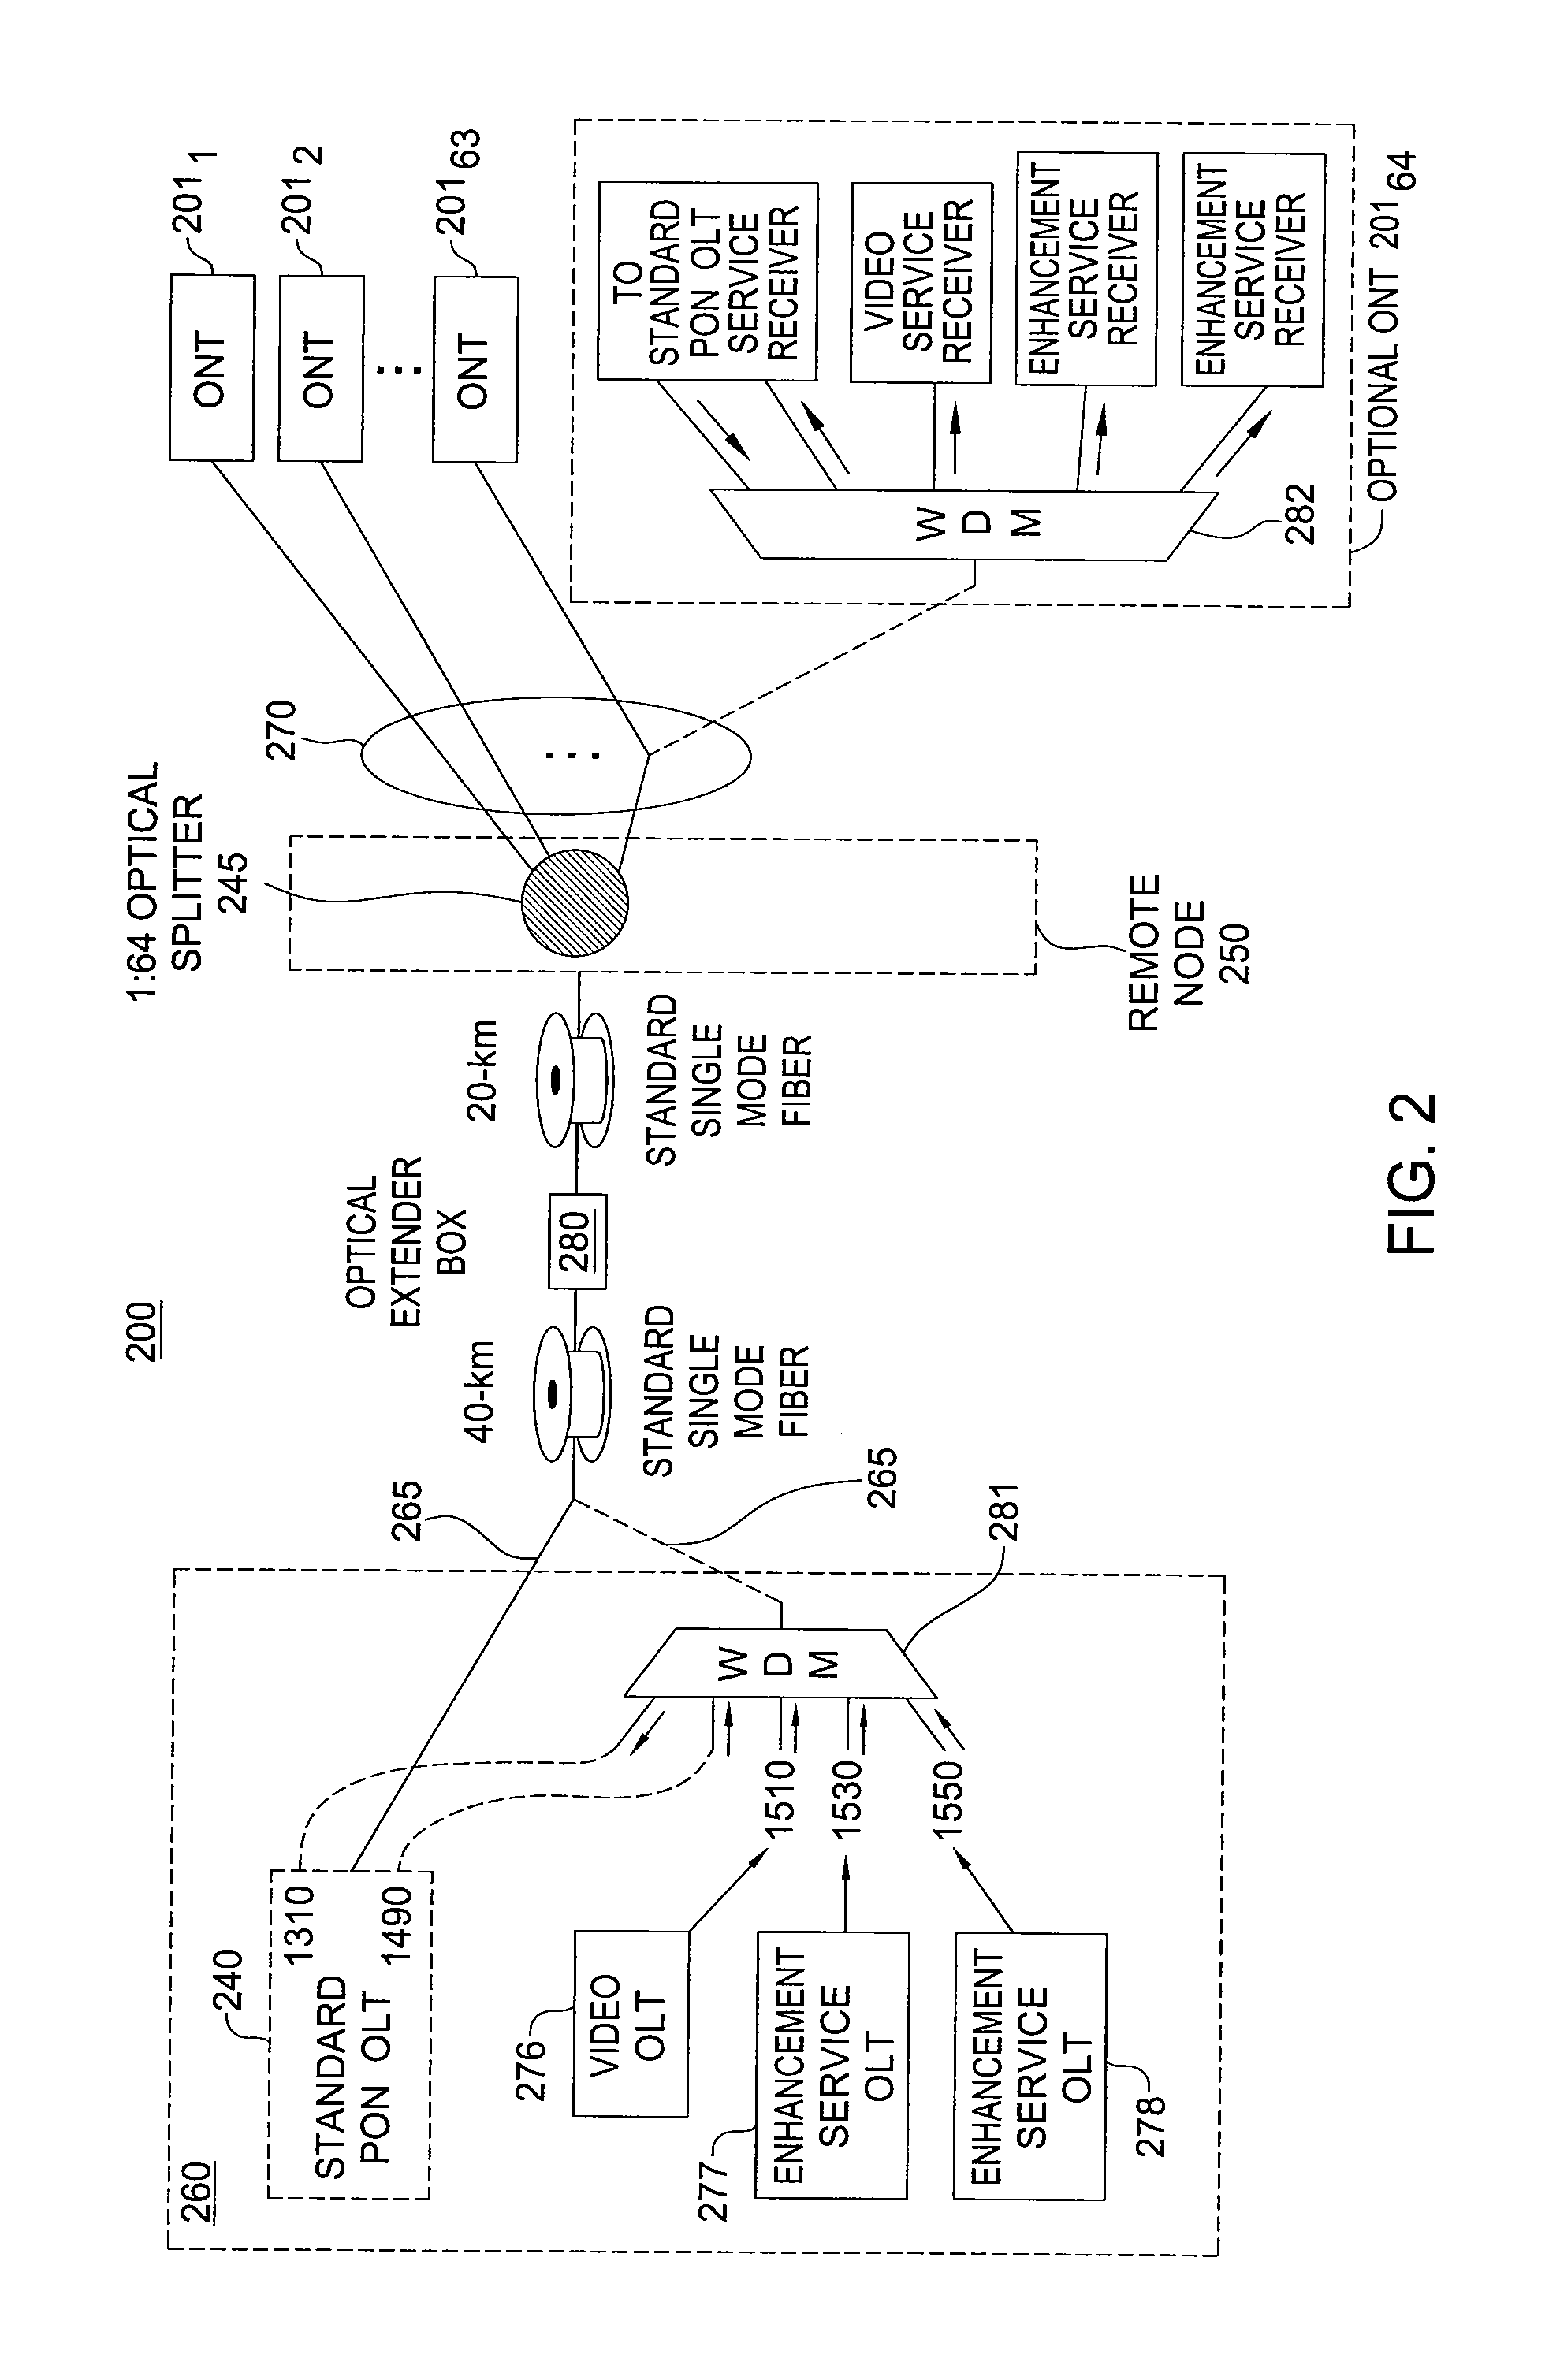 Method and apparatus for providing passive optical networks with extended reach and/or split